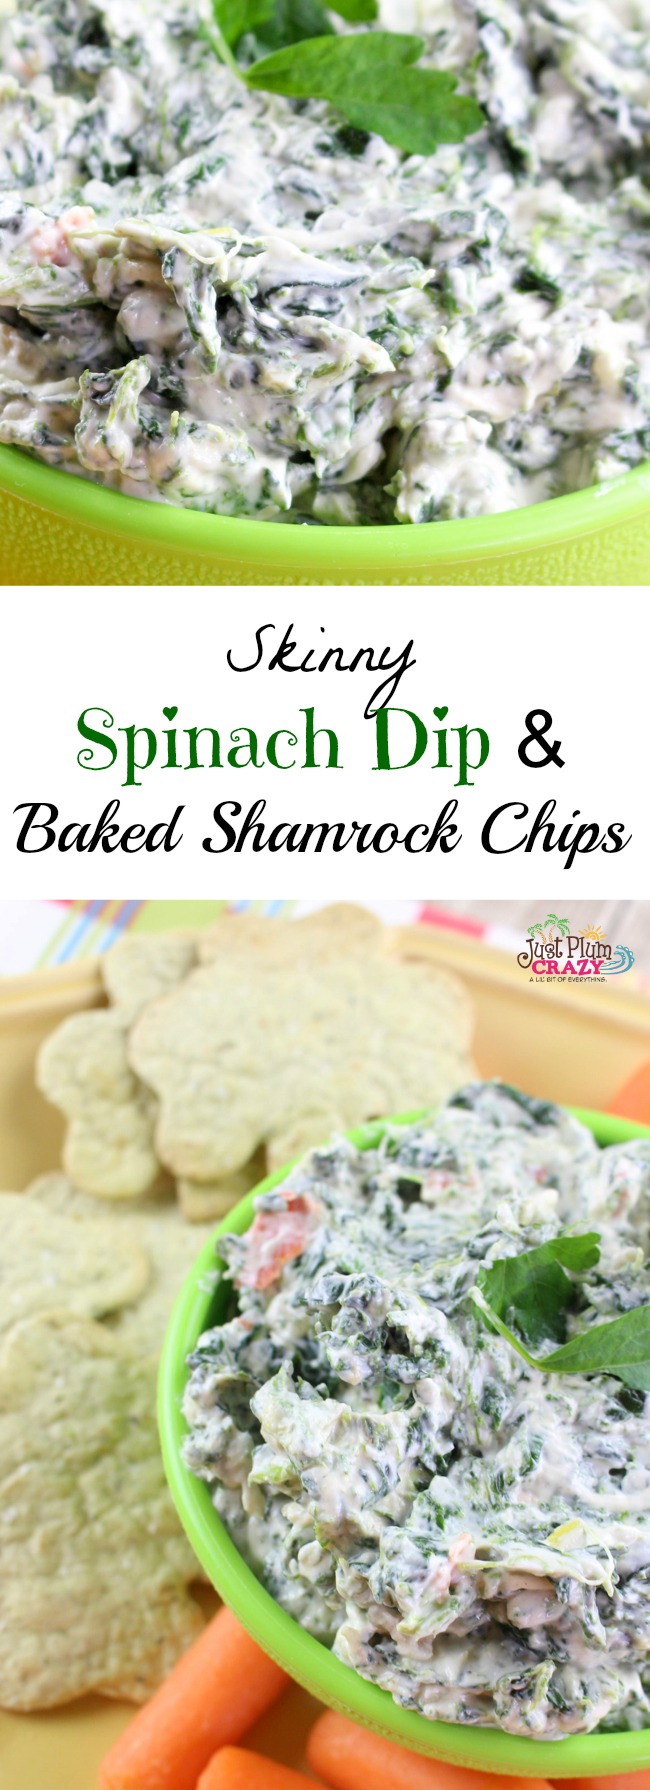 Who doesn't love Spinach dip? But you don't like love the calories. Thank goodness for Skinny Spinach Dip with Baked Shamrock Chips Recipe.